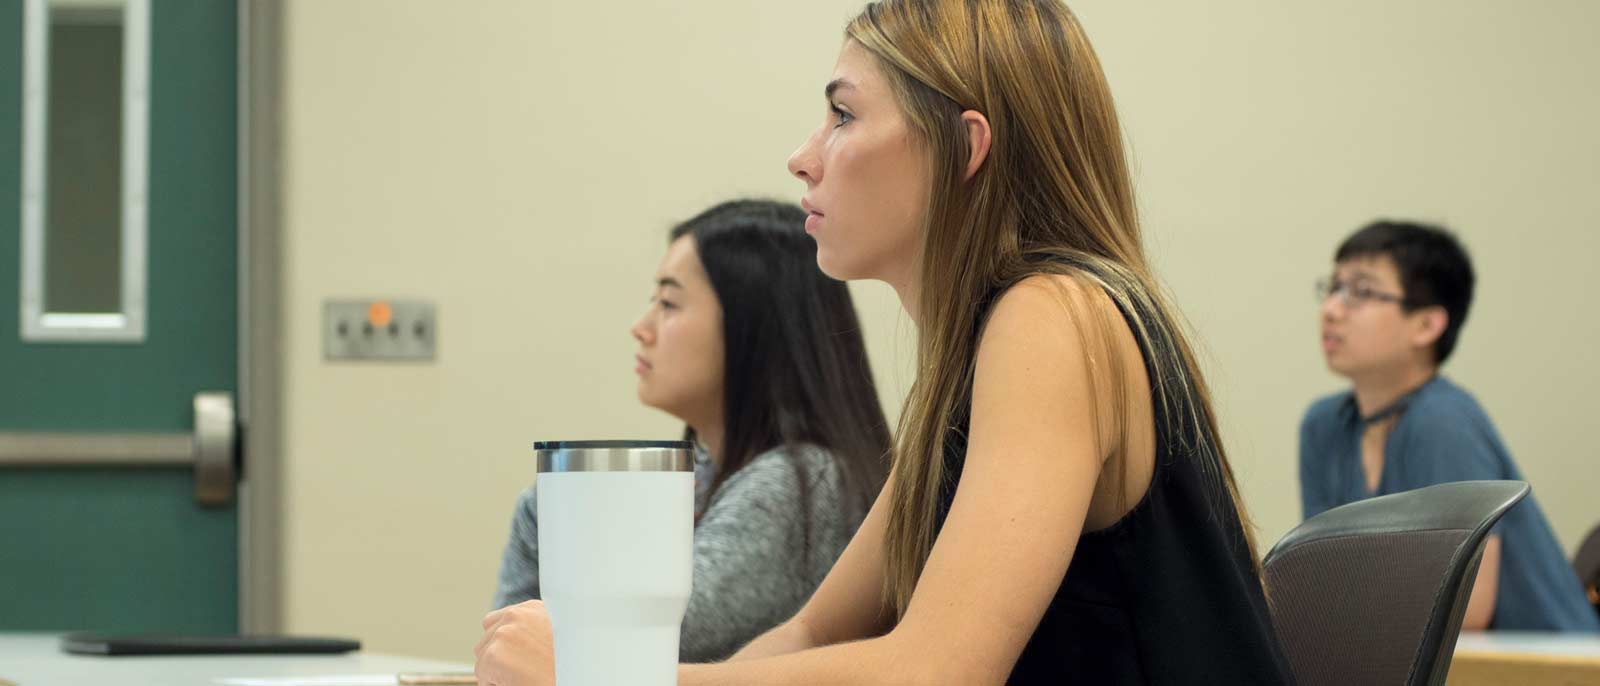 Undergraduate student sits attentively and listens to a presentation.